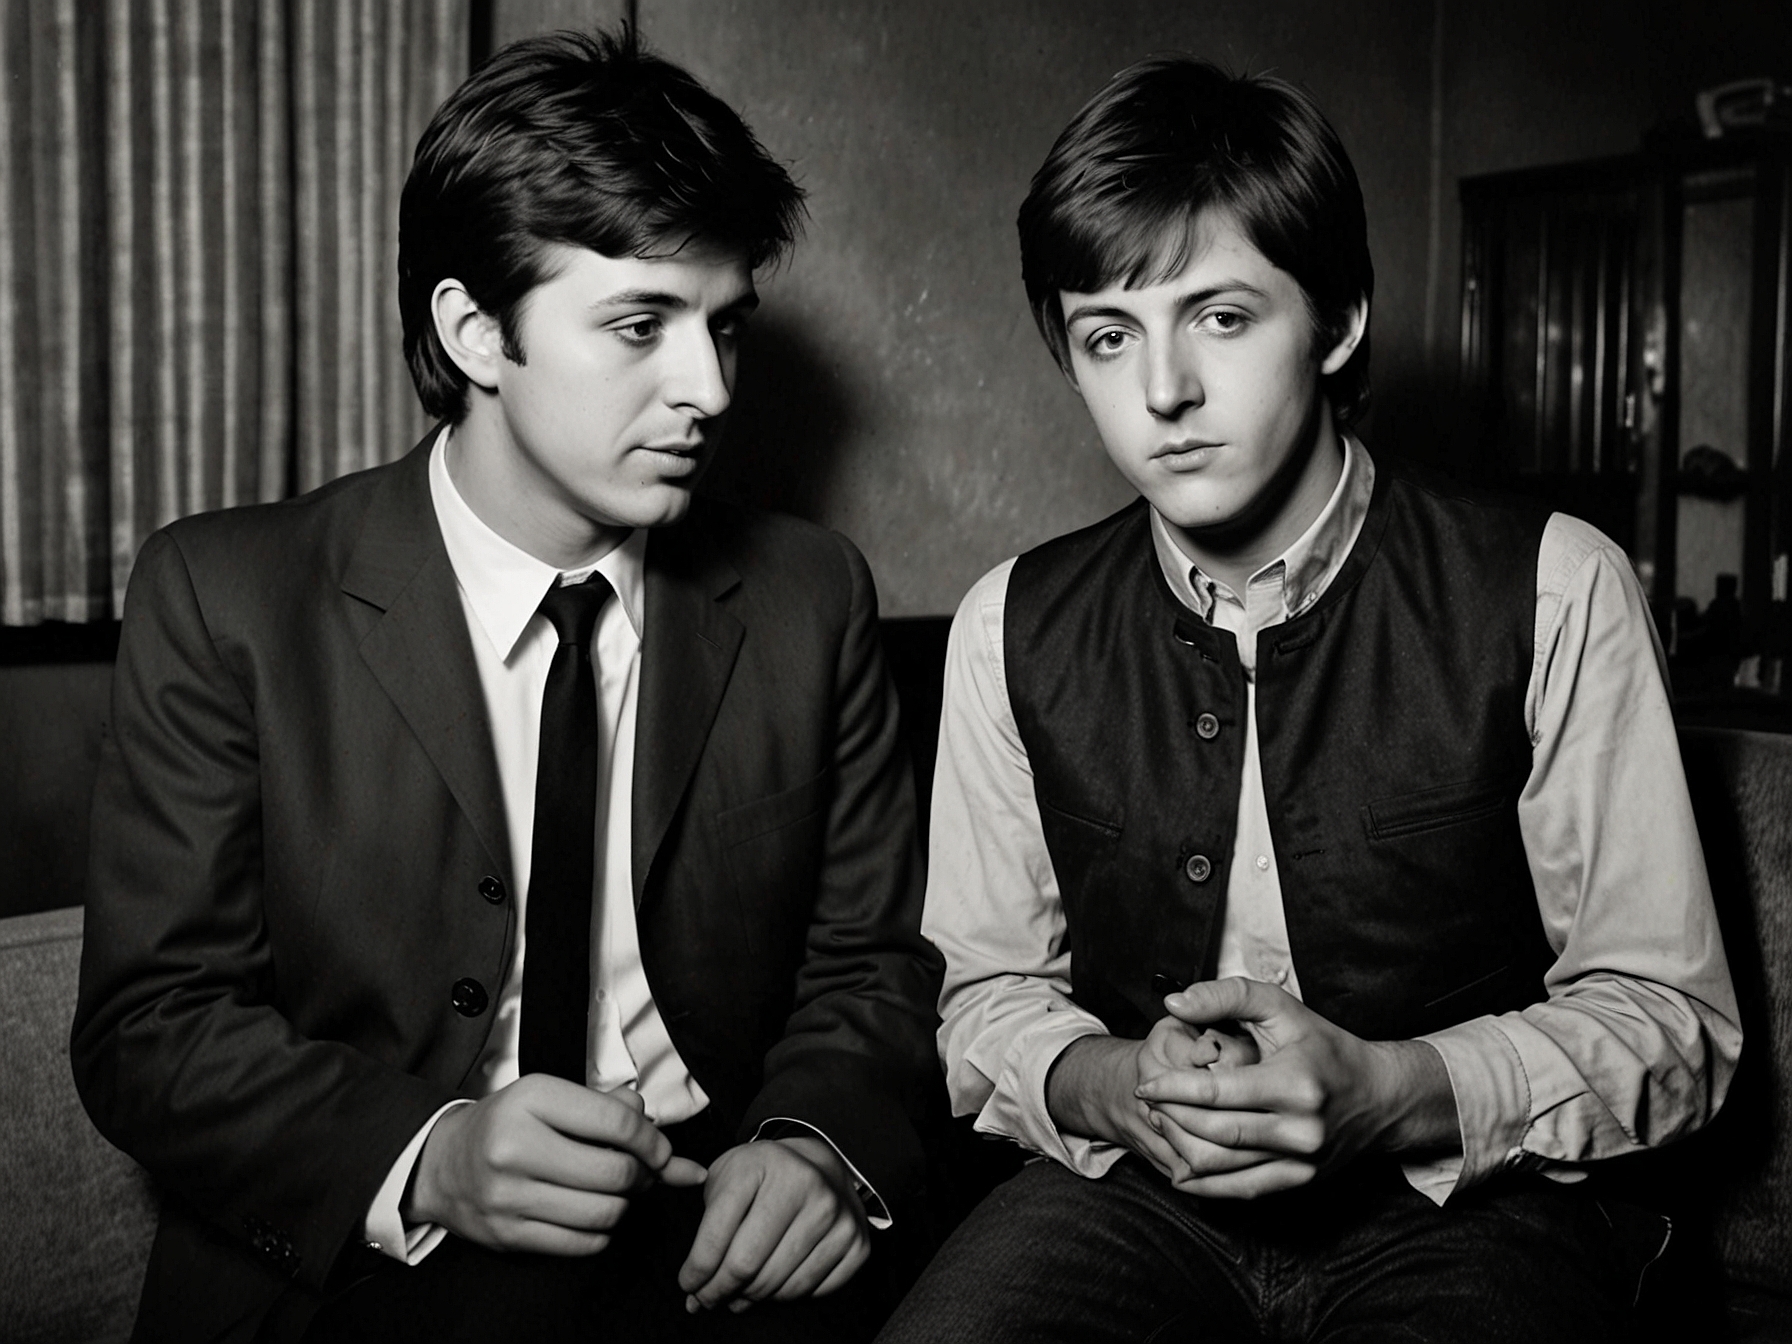 An old black-and-white photo of Pete Best and Paul McCartney during their early days in the Beatles, capturing a moment of camaraderie among the young, aspiring musicians.